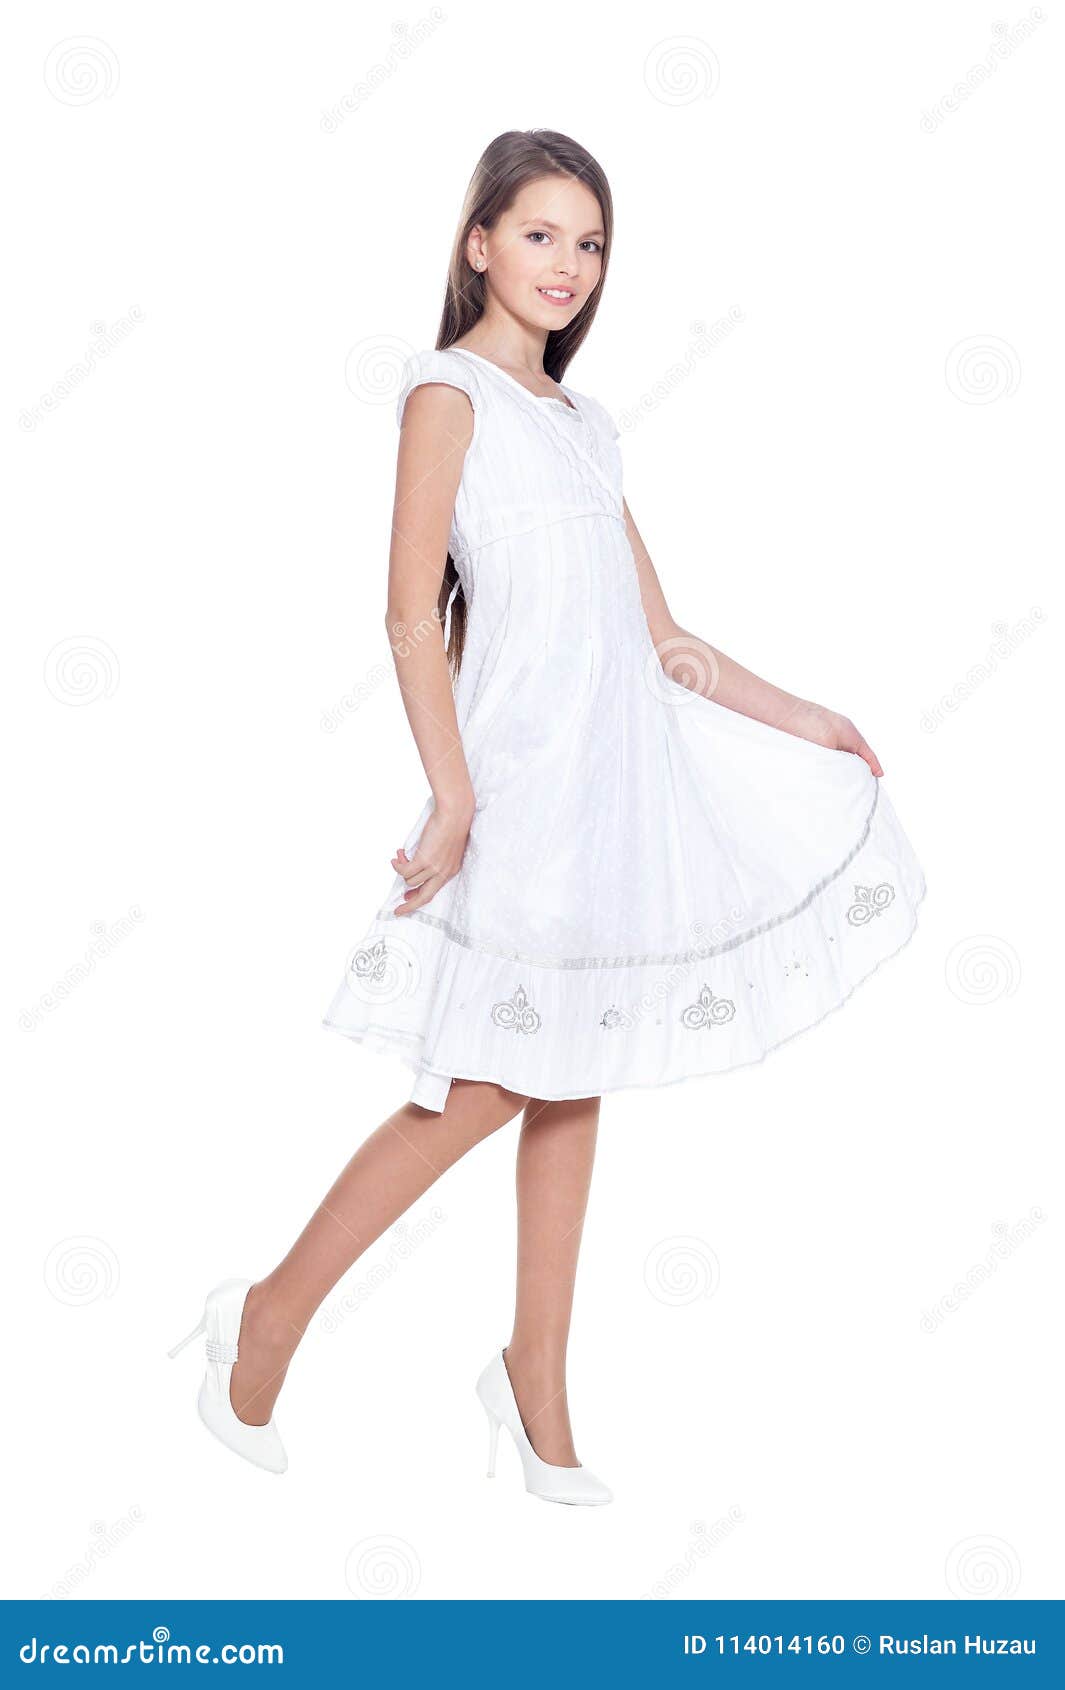 Little girl in white dress stock photo. Image of lifestyle - 114014160